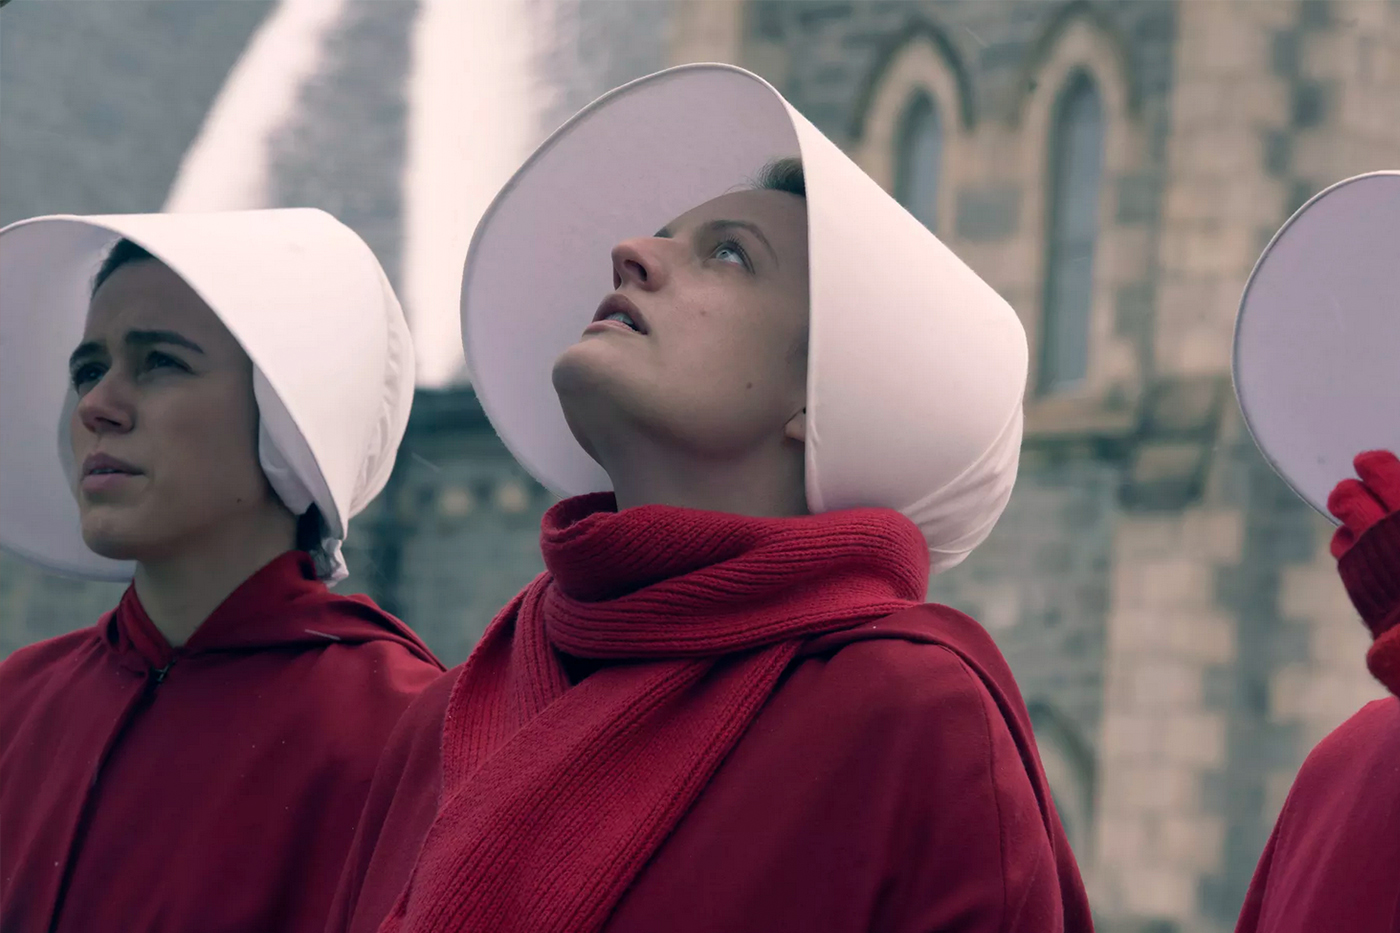 What The Handmaid's Tale, Hulu's dystopian drama, can teach us about the future - Northeastern Global News